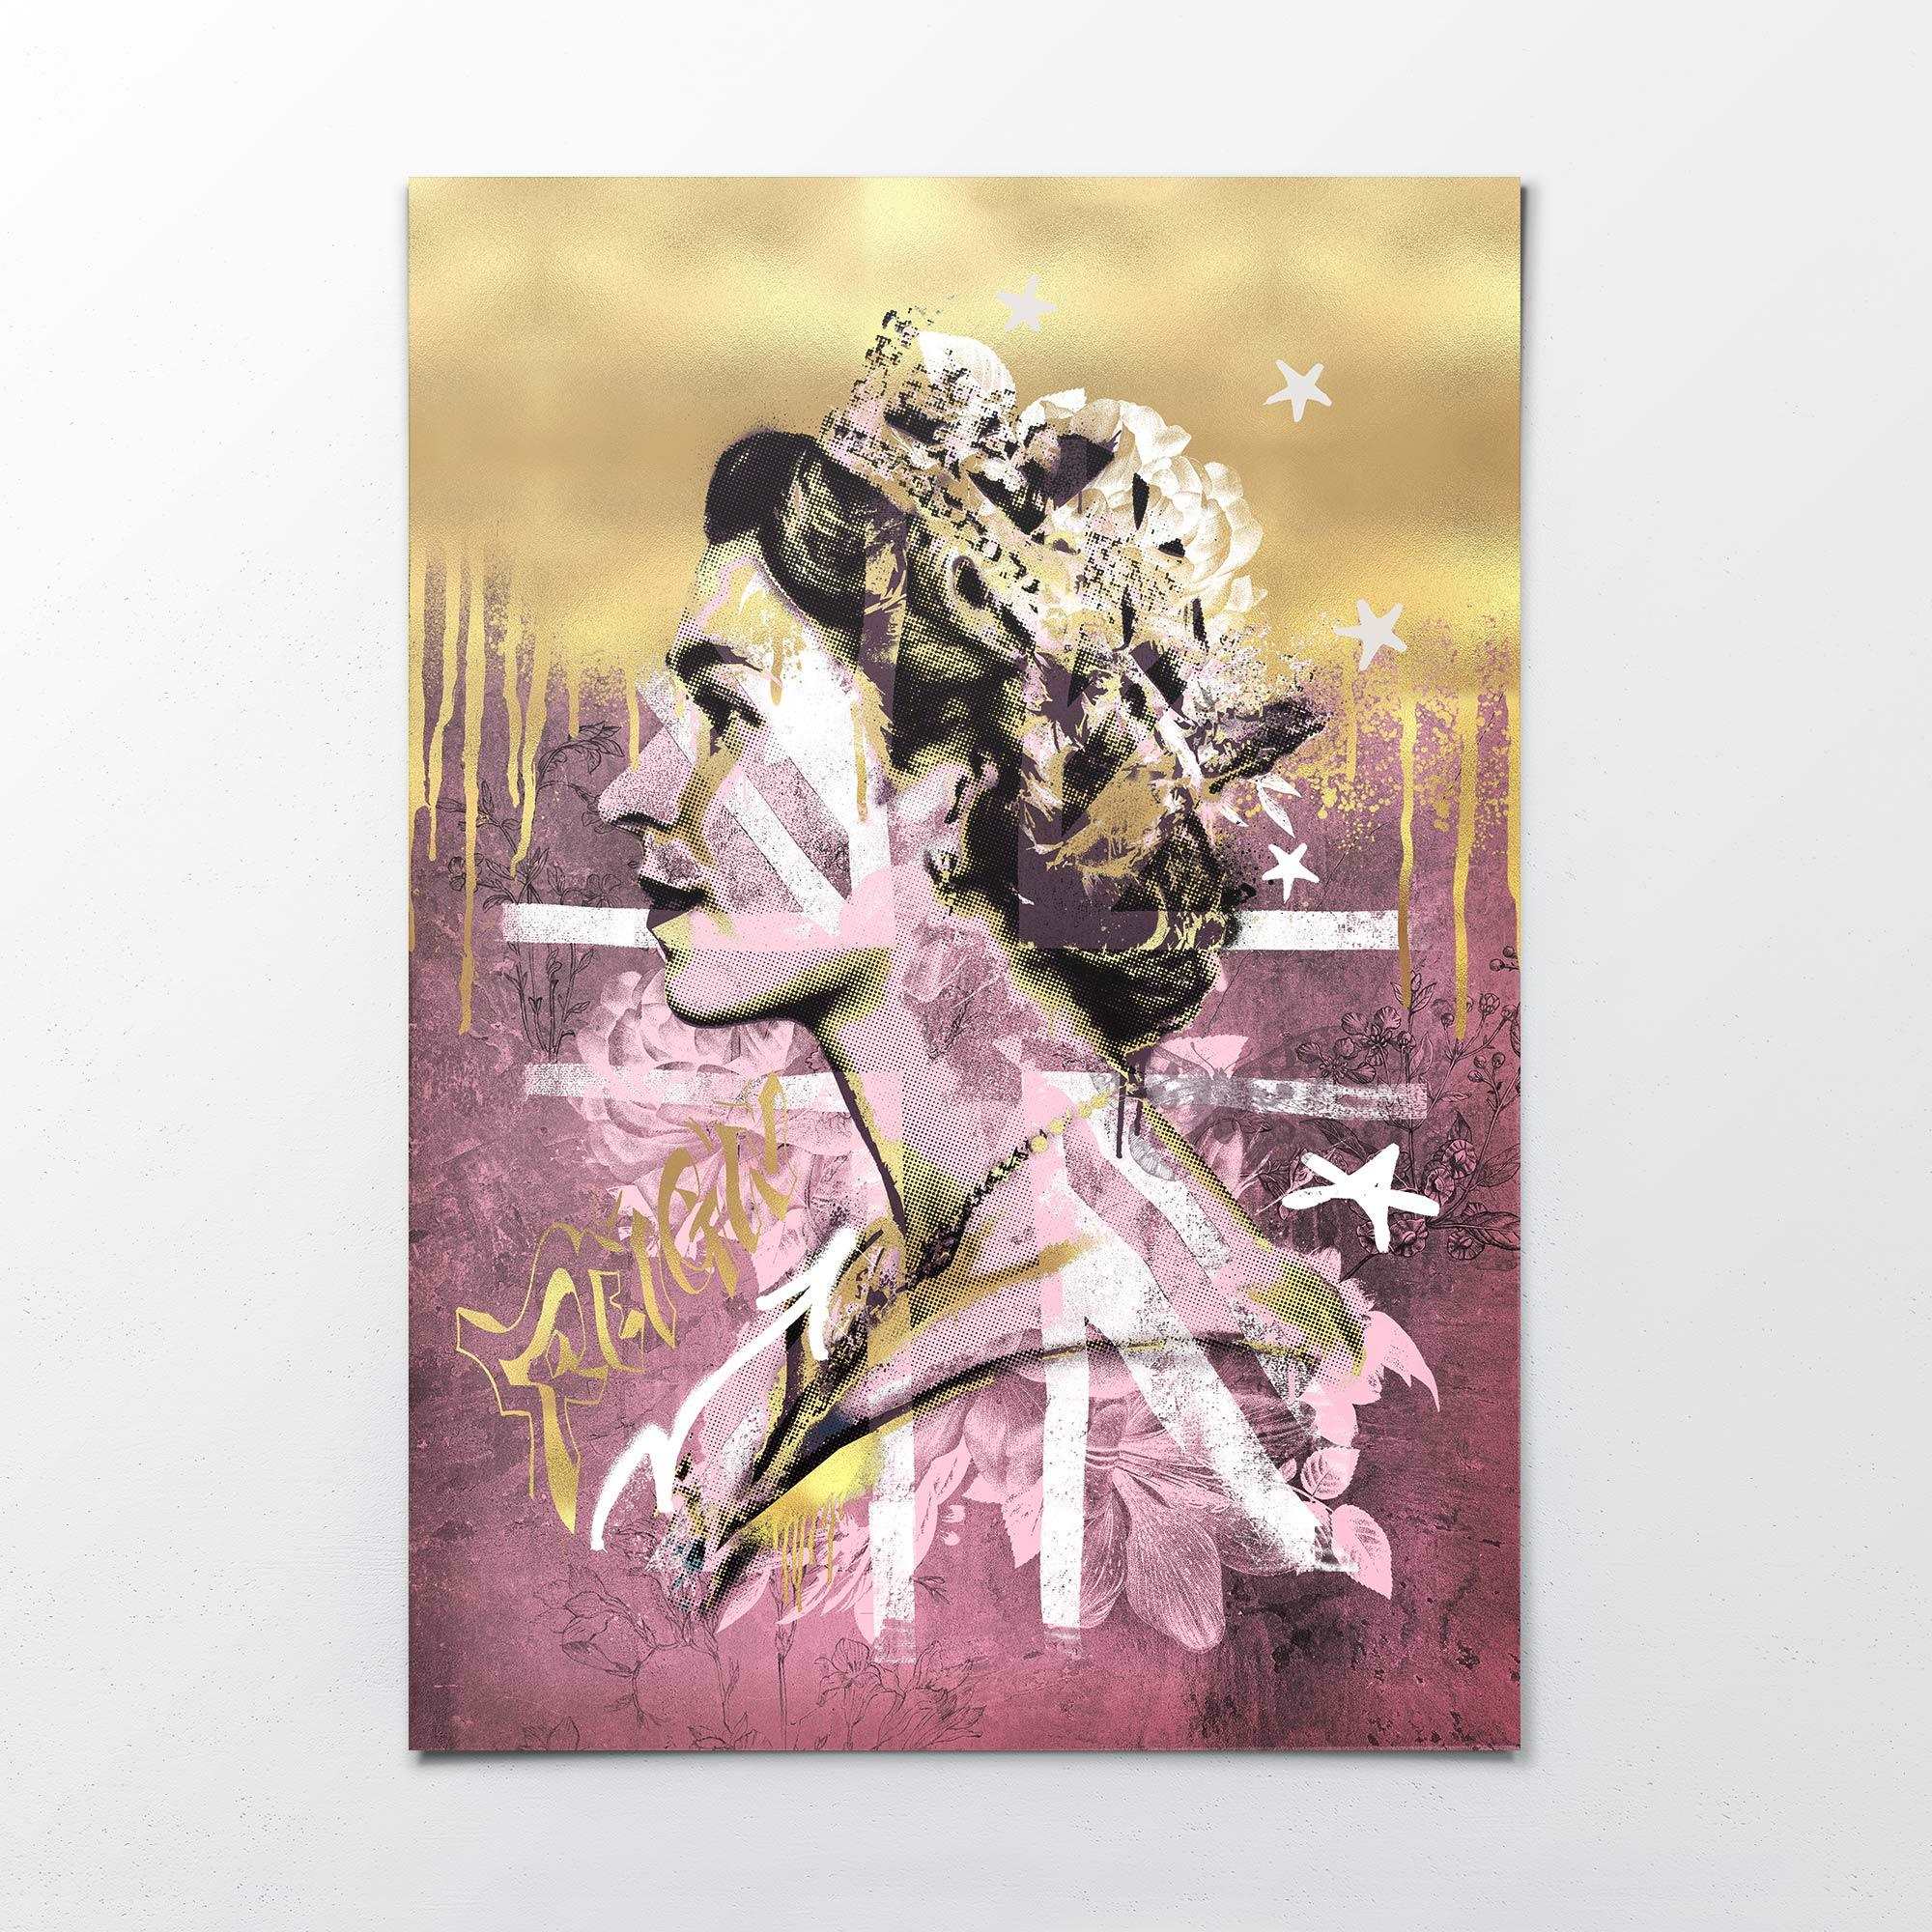 REIGN OVER ME ROUGE / GOLD PRINT - Afterhours Gallery 